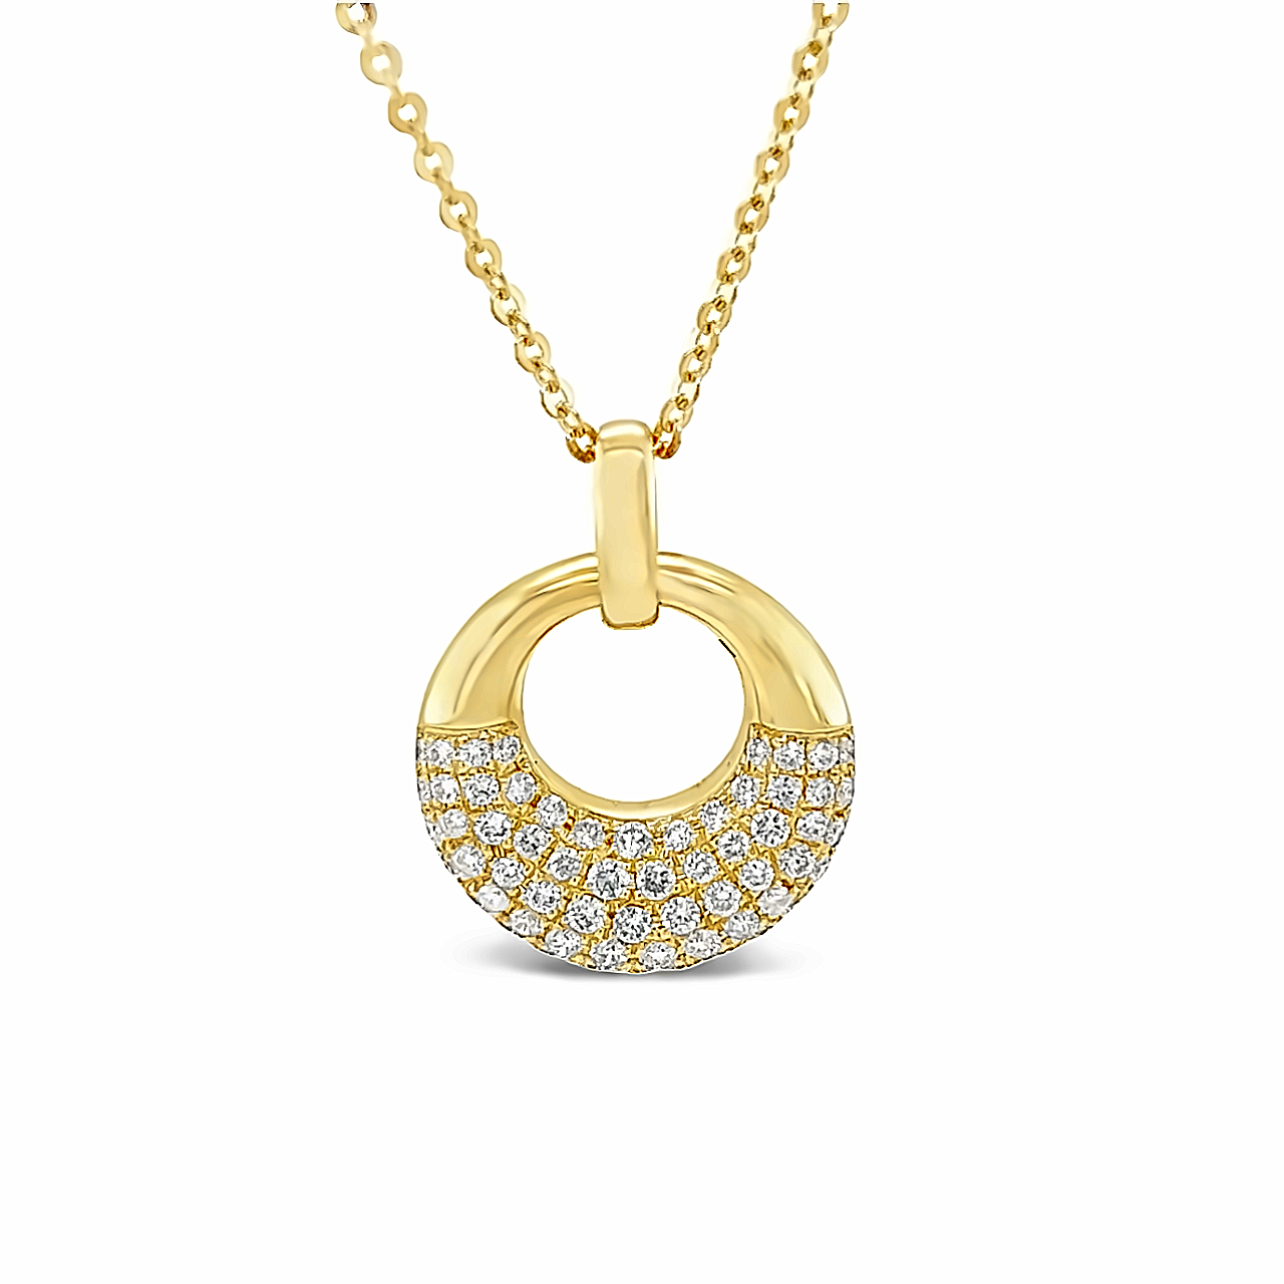 Featured image for “Diamond Disc Necklace”